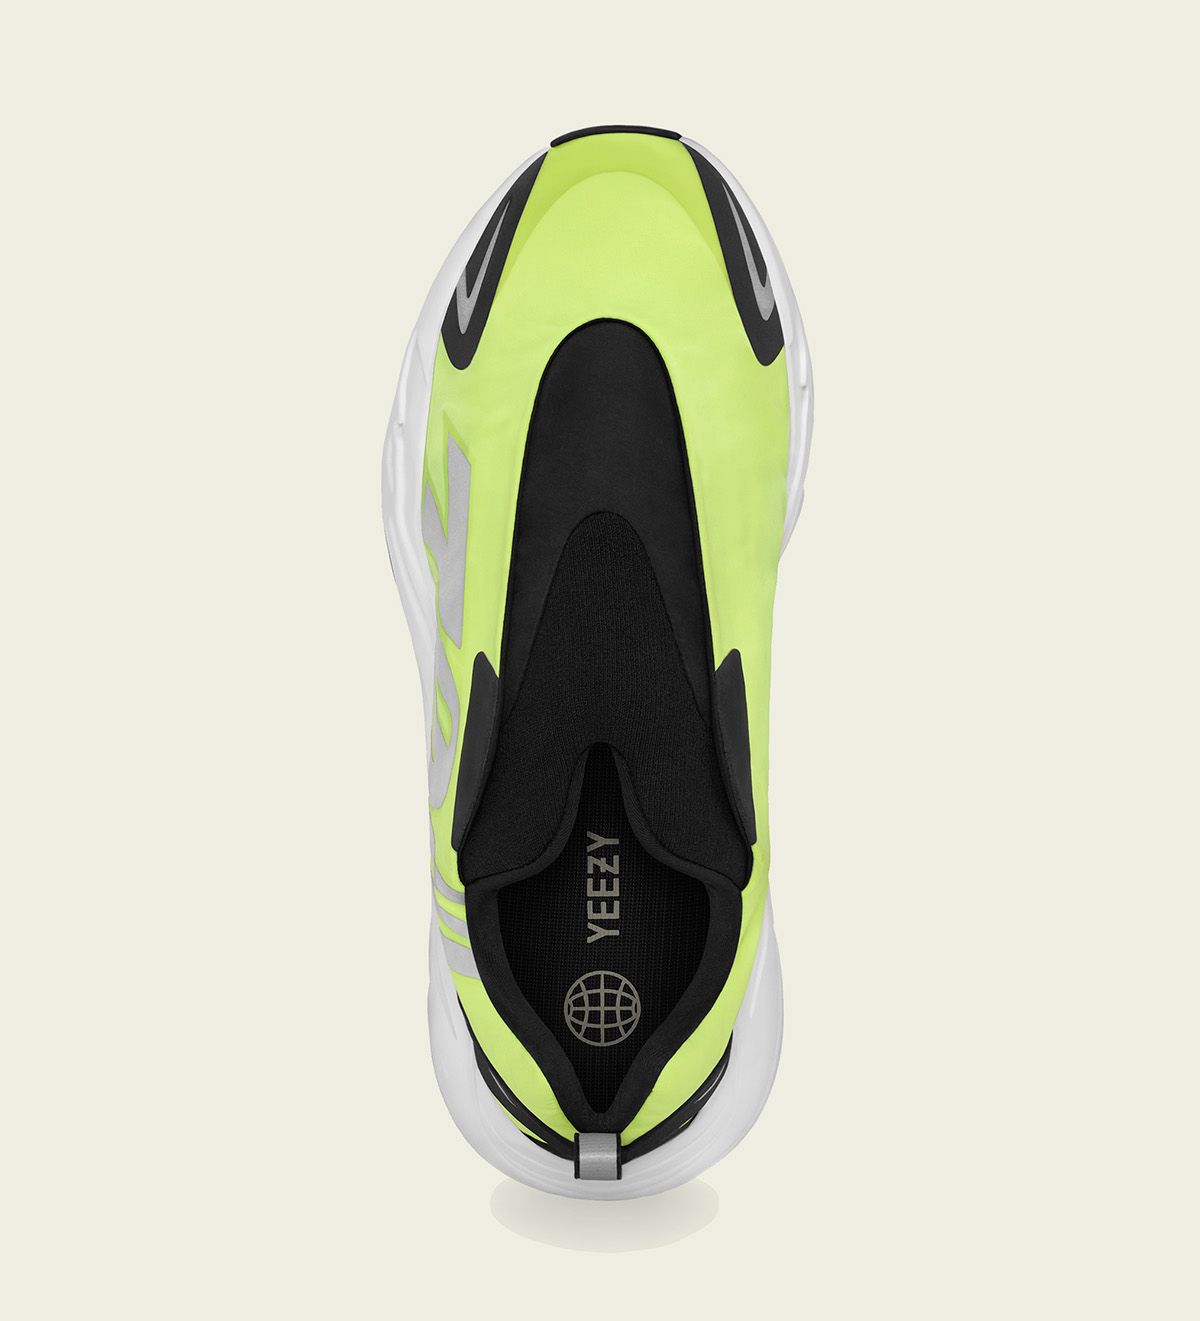 Where to Buy the Laceless YEEZY 700 MNVN “Phosphor” | House of Heat°